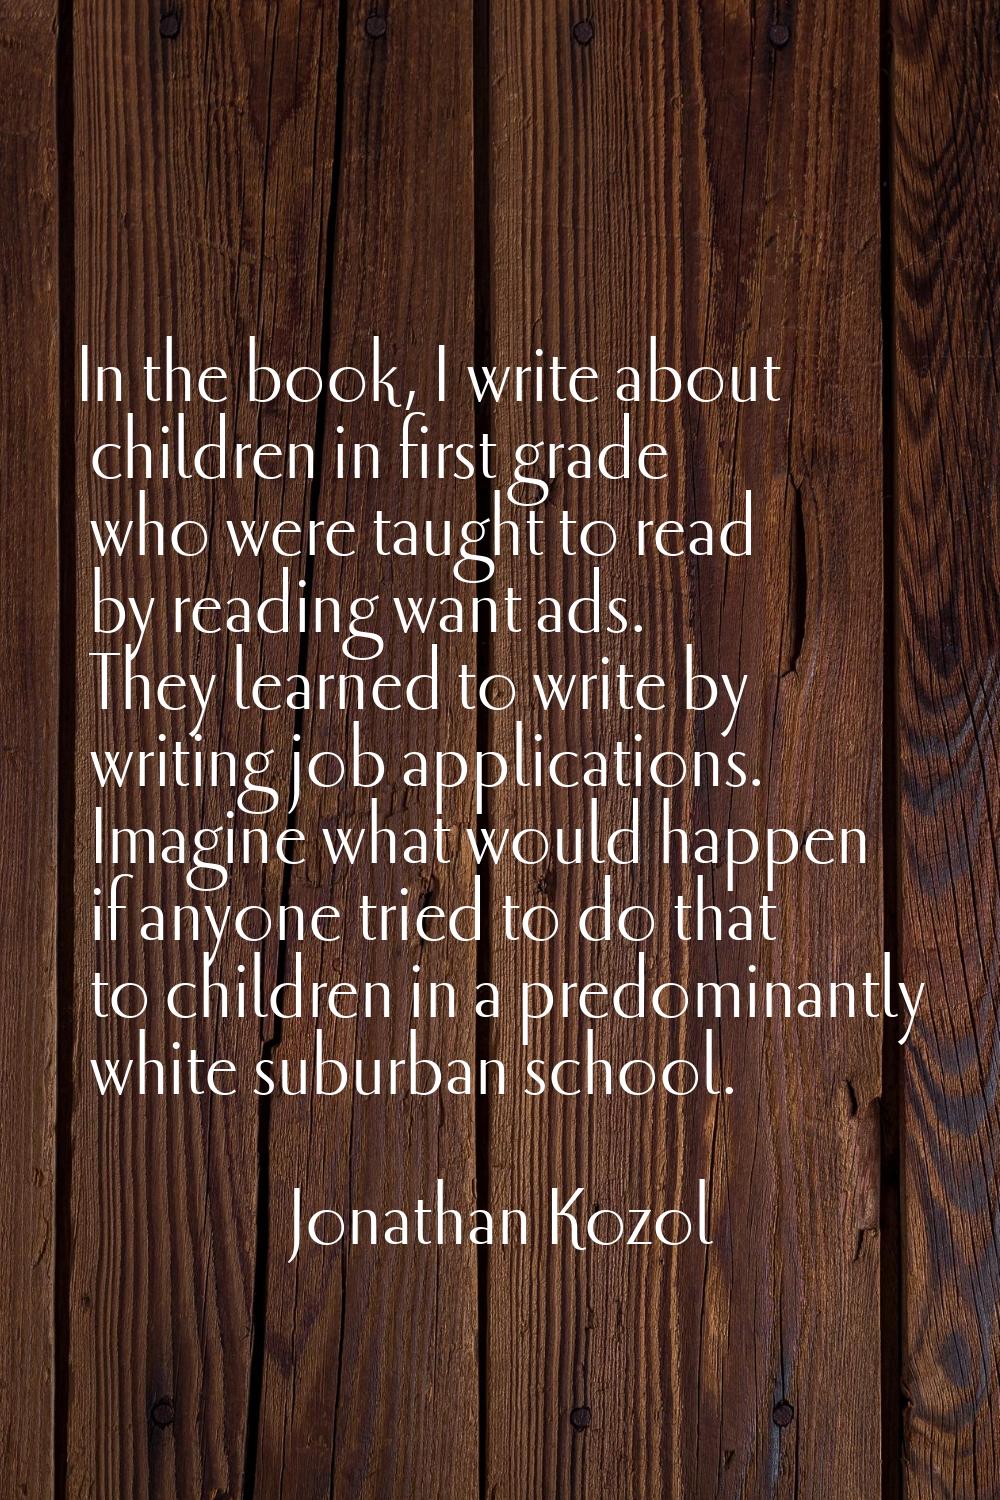 In the book, I write about children in first grade who were taught to read by reading want ads. The